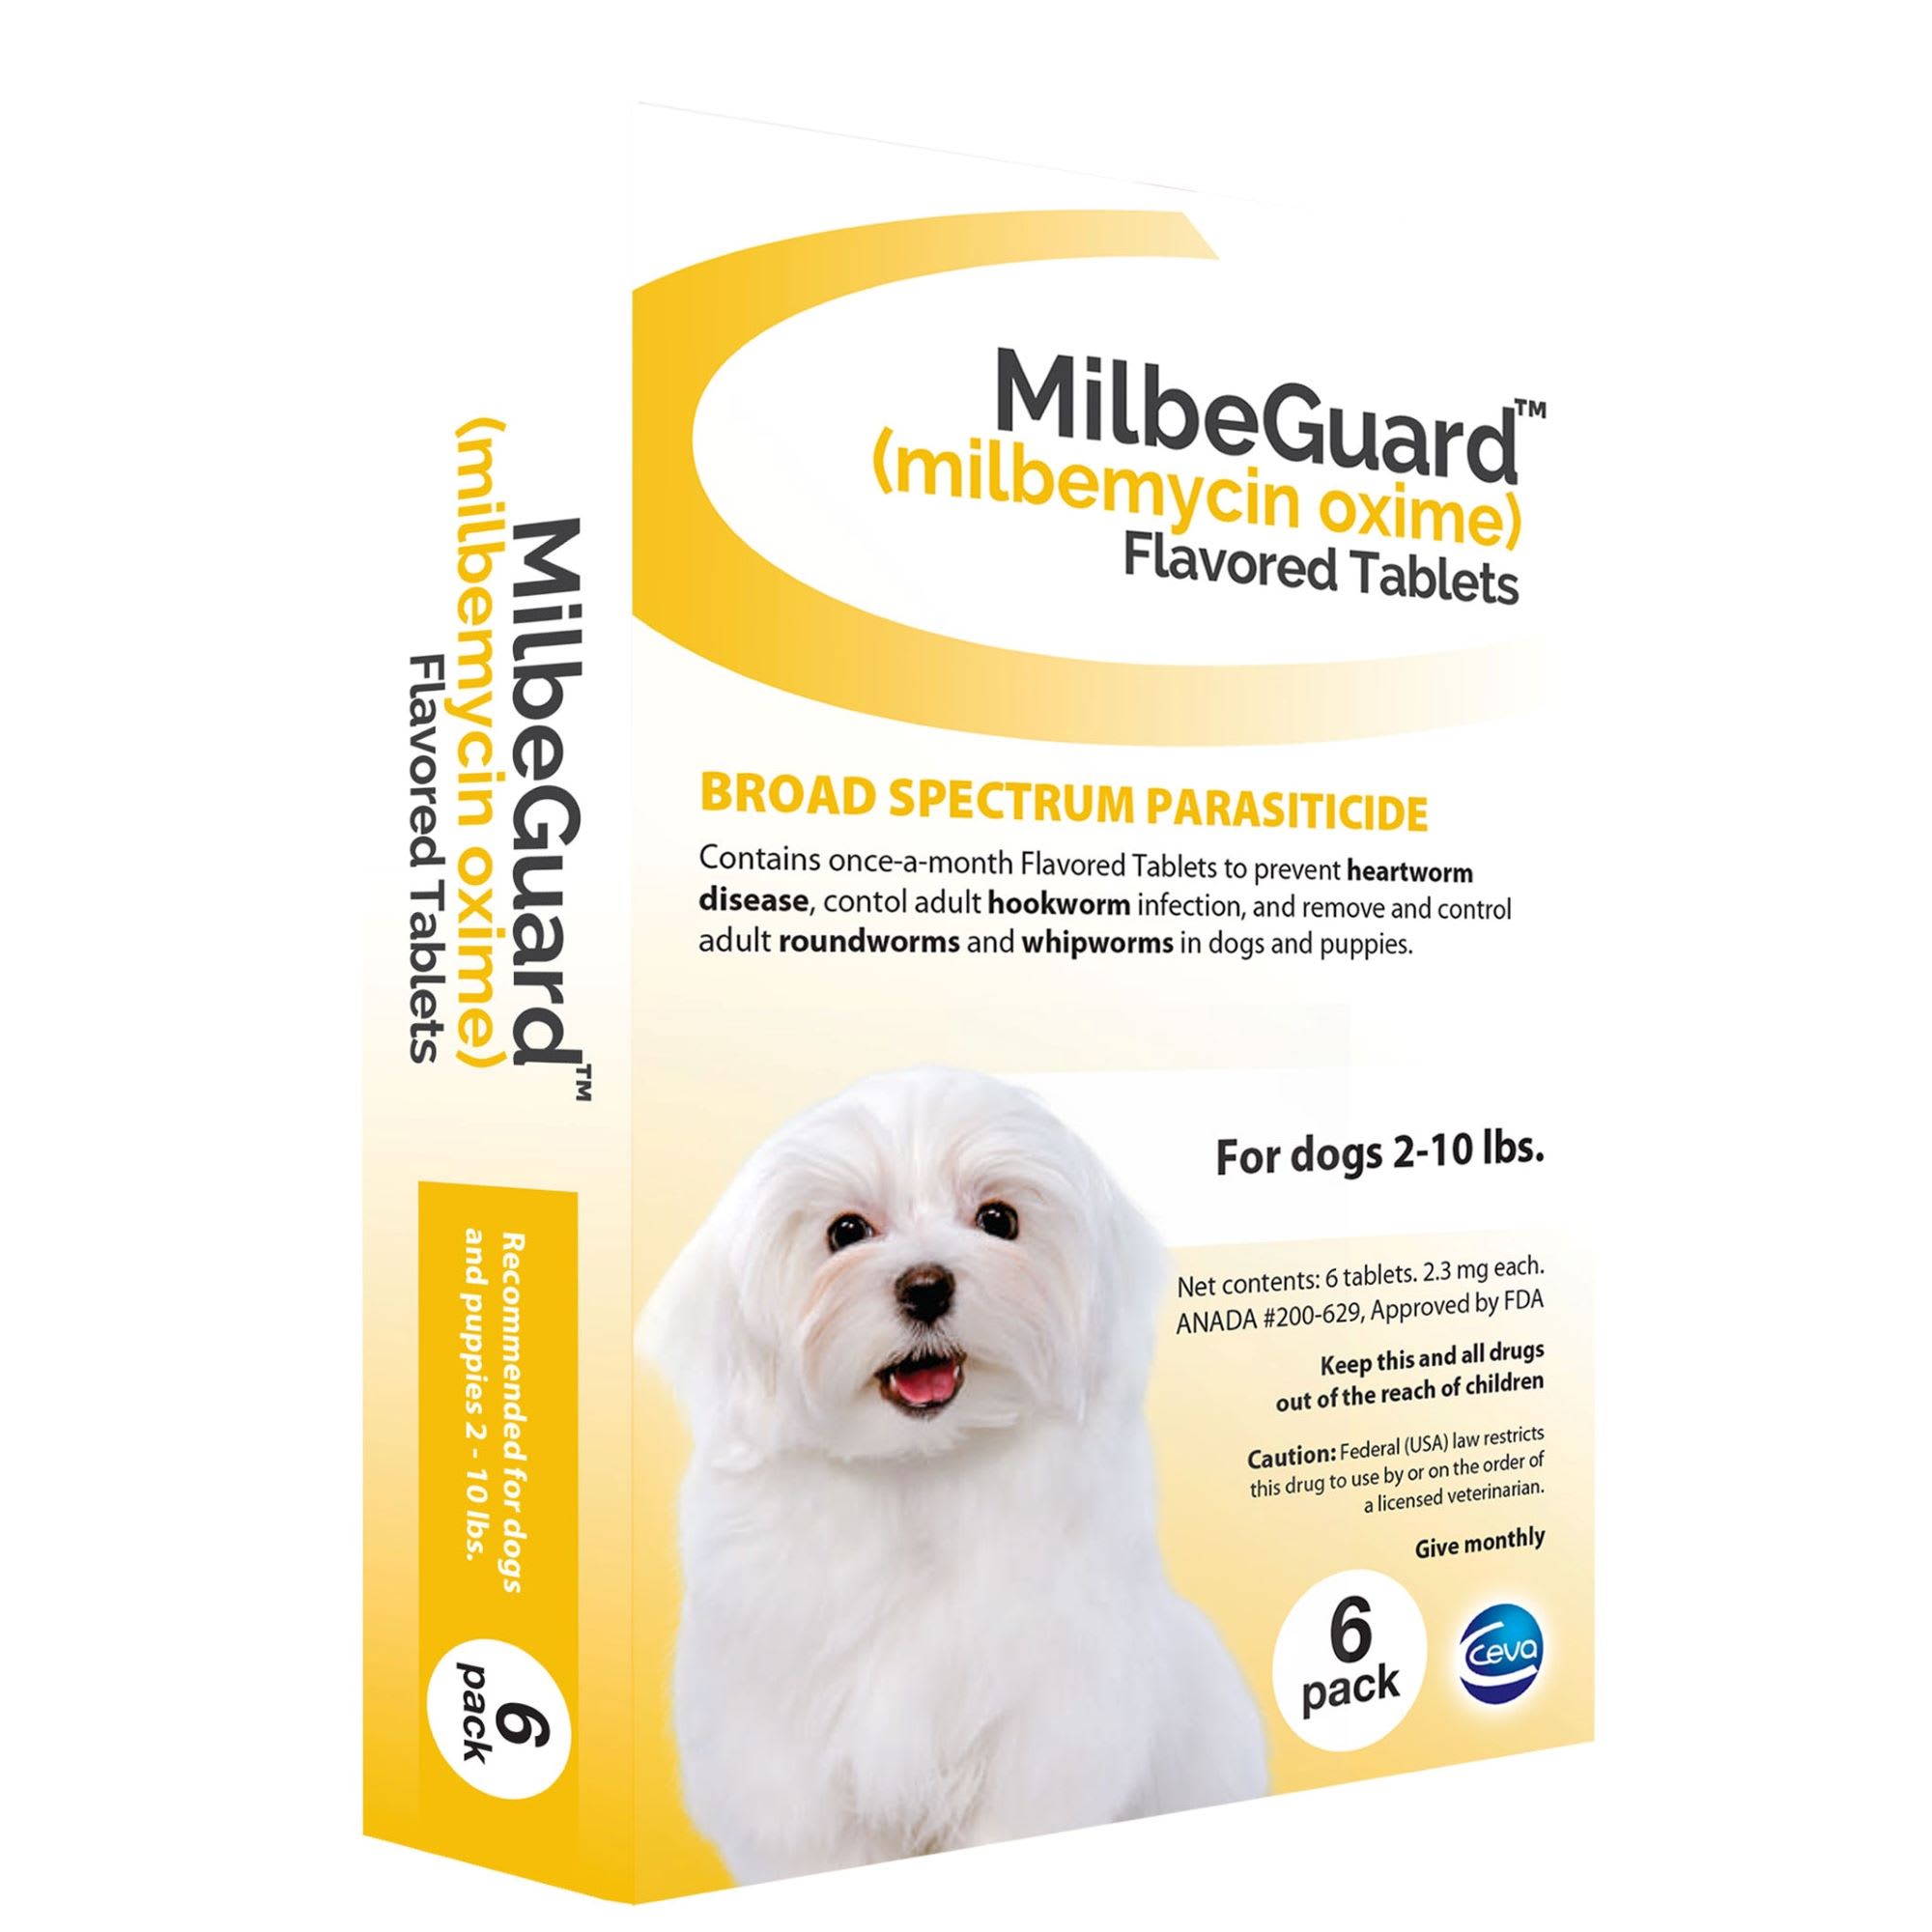 milbeguard-flavored-tablets-for-dogs-2-to-10-lbs-6-month-supply-petco